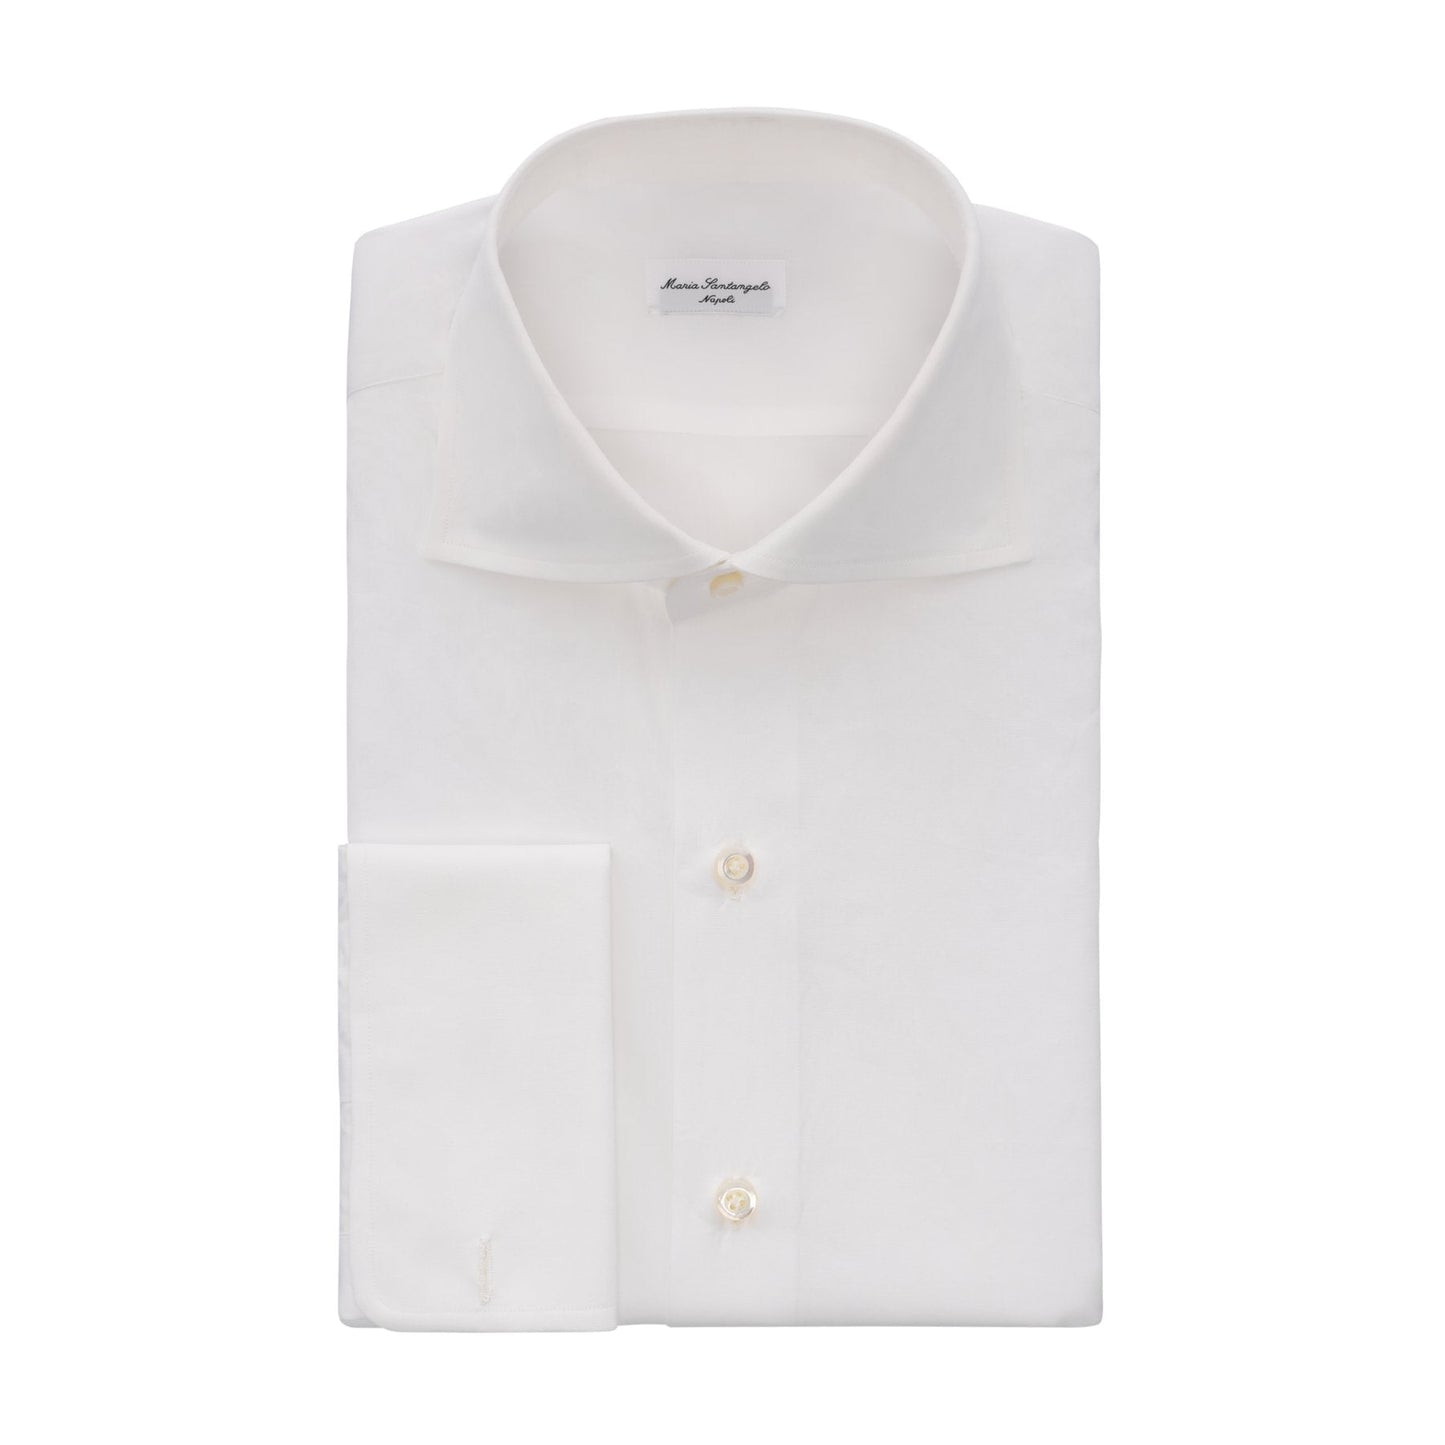 Maria Santangelo Classic Cotton Dress Shirt in White with Double Cuff - SARTALE